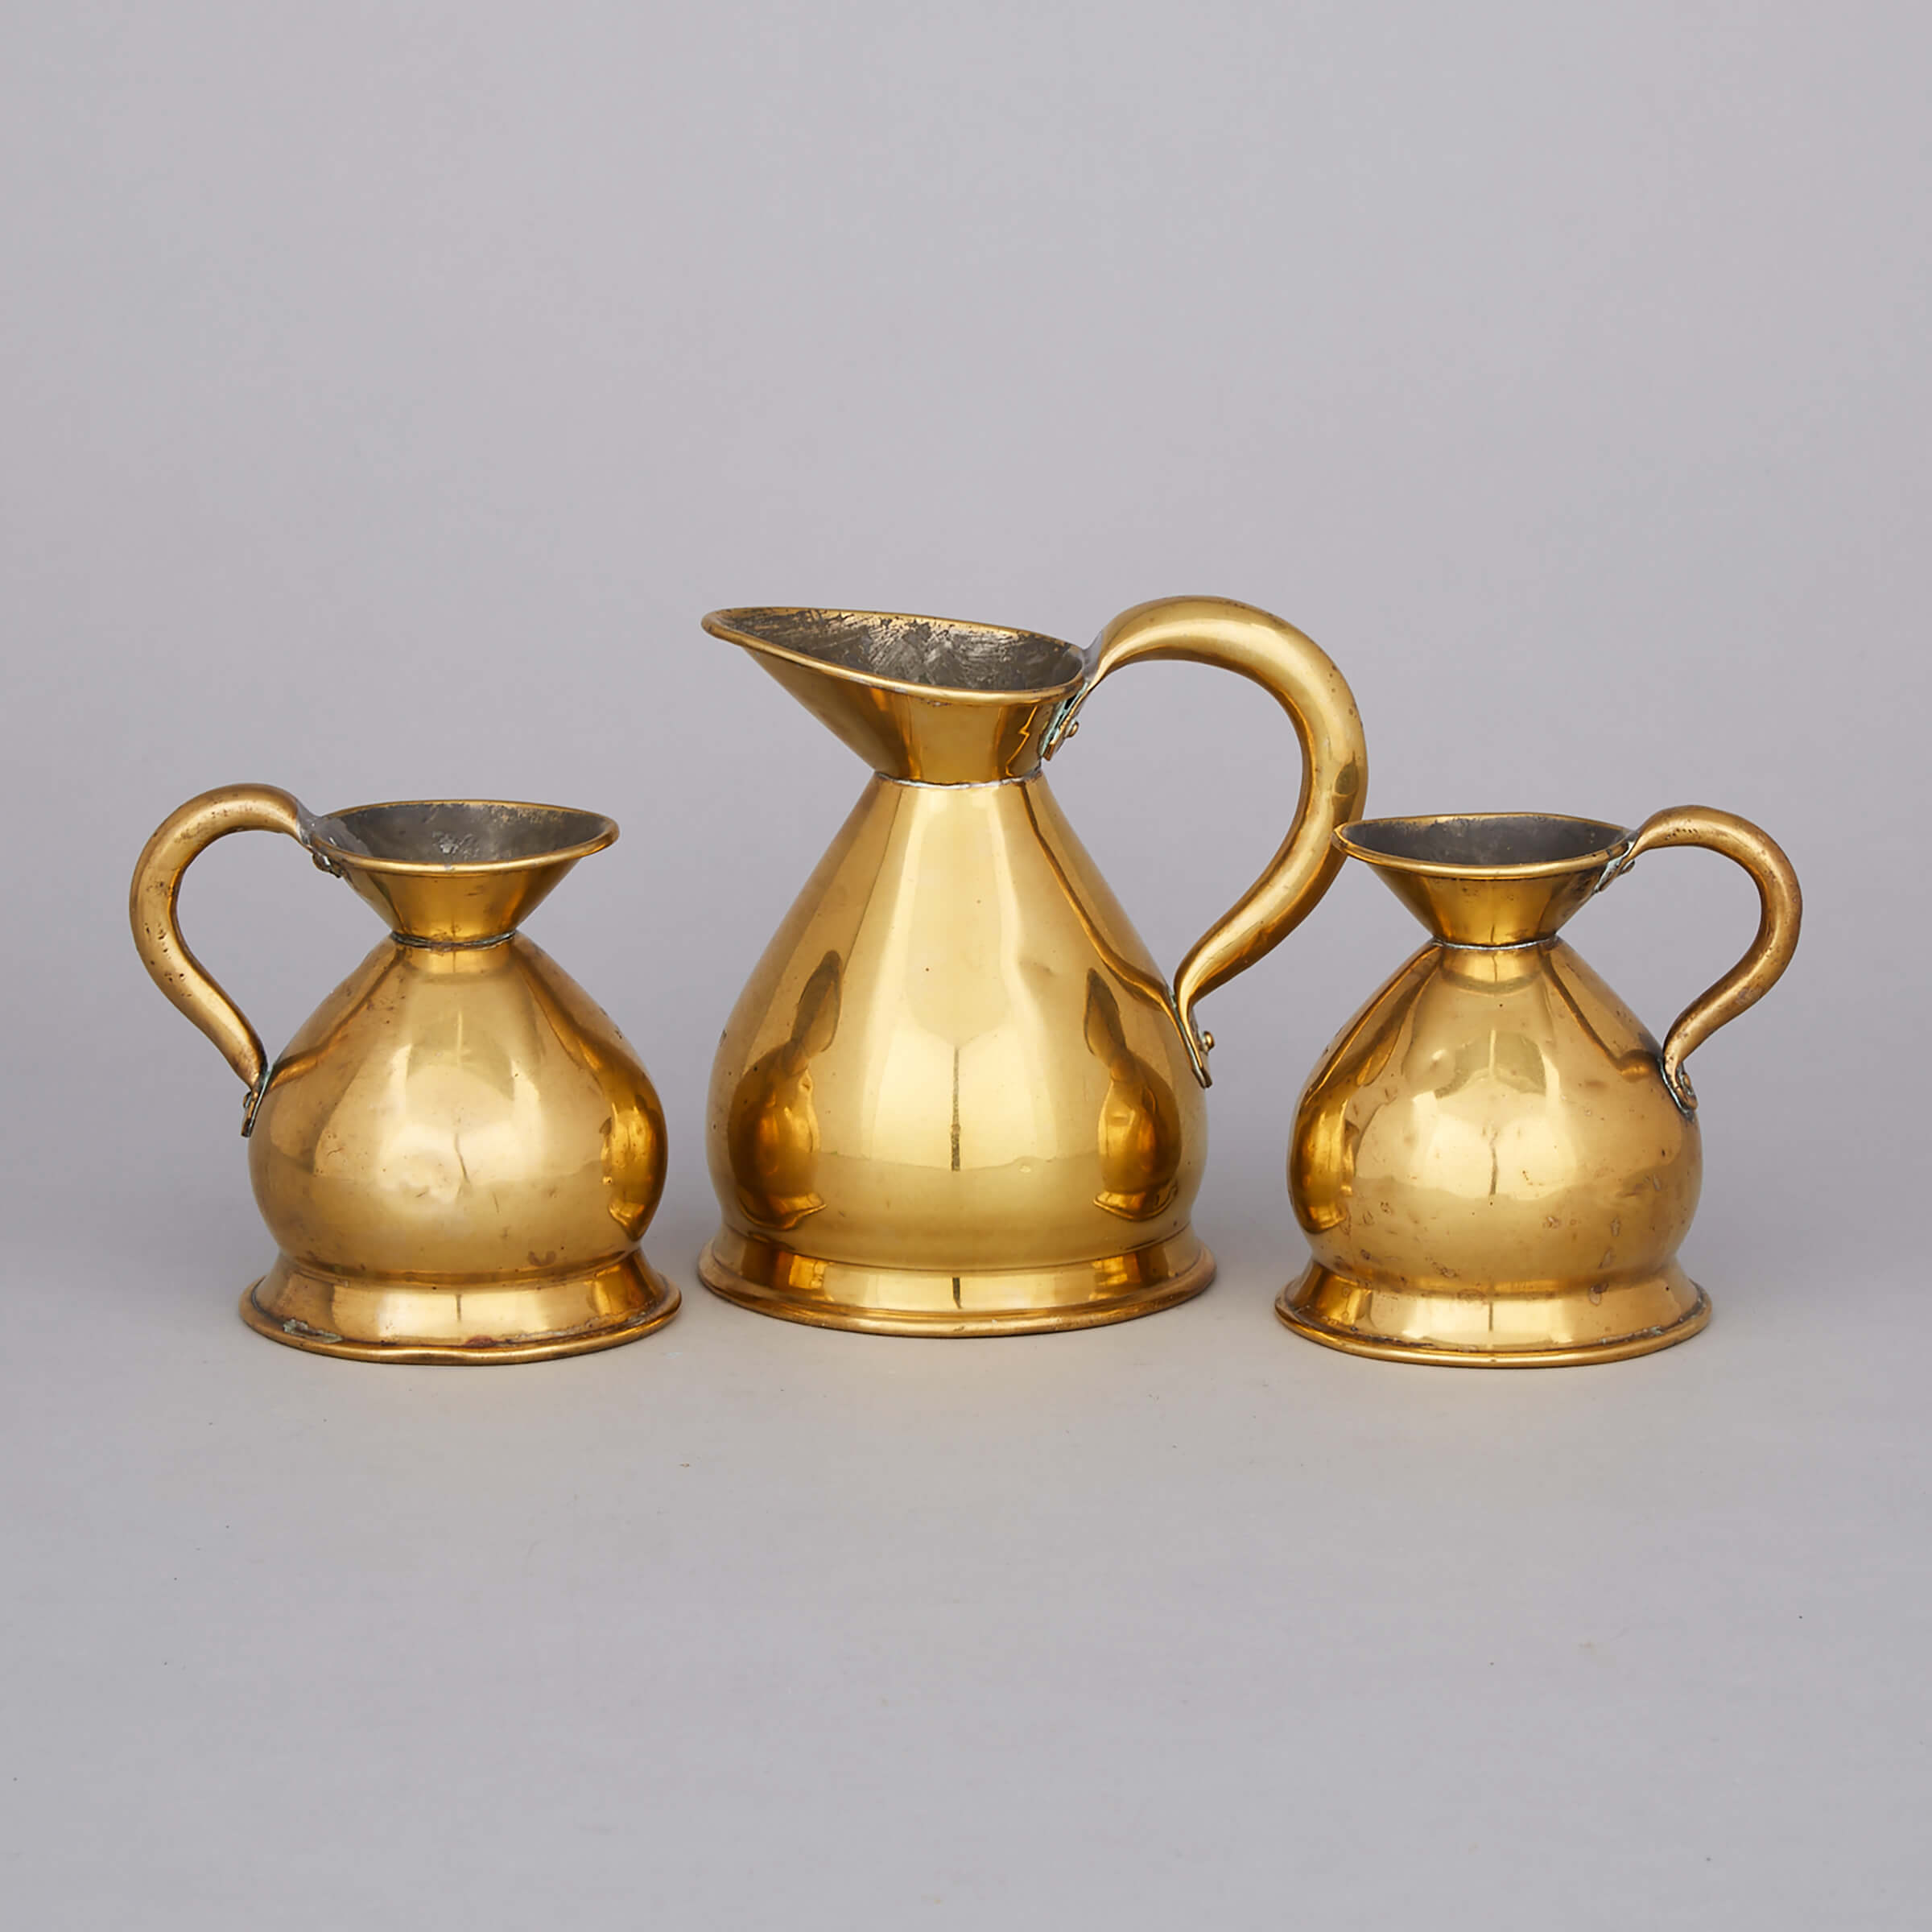 Three English Brass Haystack Measures, 19th and early 20th centuries